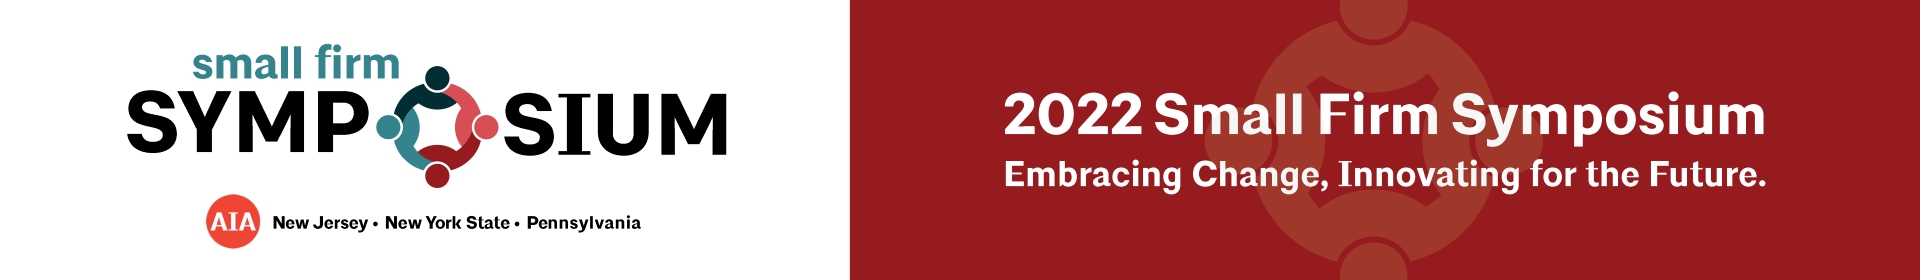 2022 Virtual Small Firms Symposium Event Banner